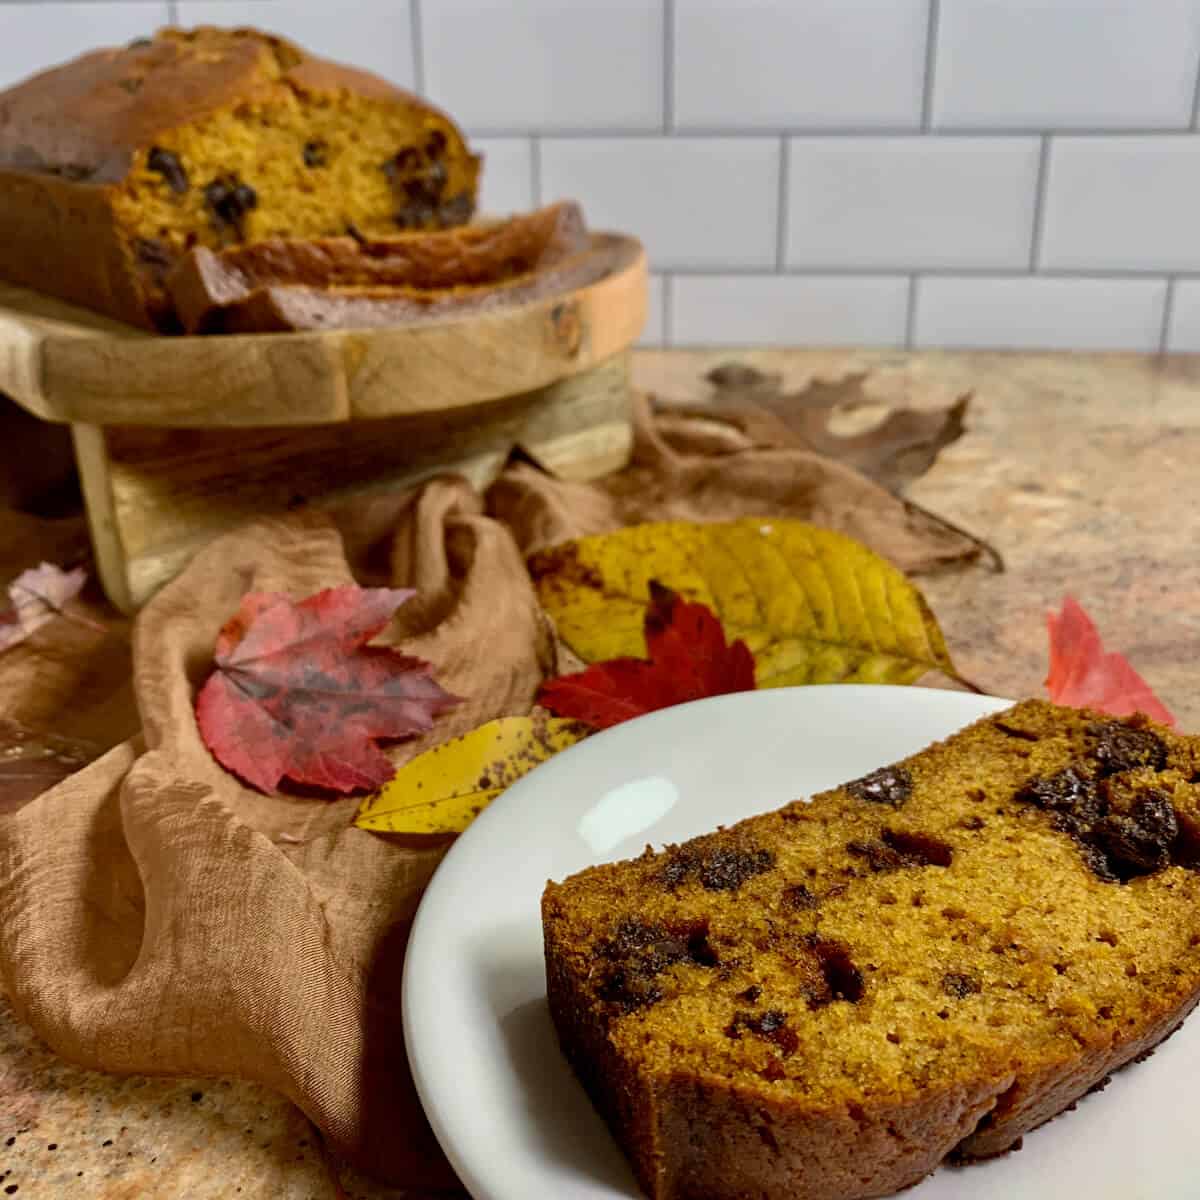 Plated slice of Pumpkin Bread on a white plate with sliced loaf wood tray surrounded by Fall leaves on a brown scarf in background.